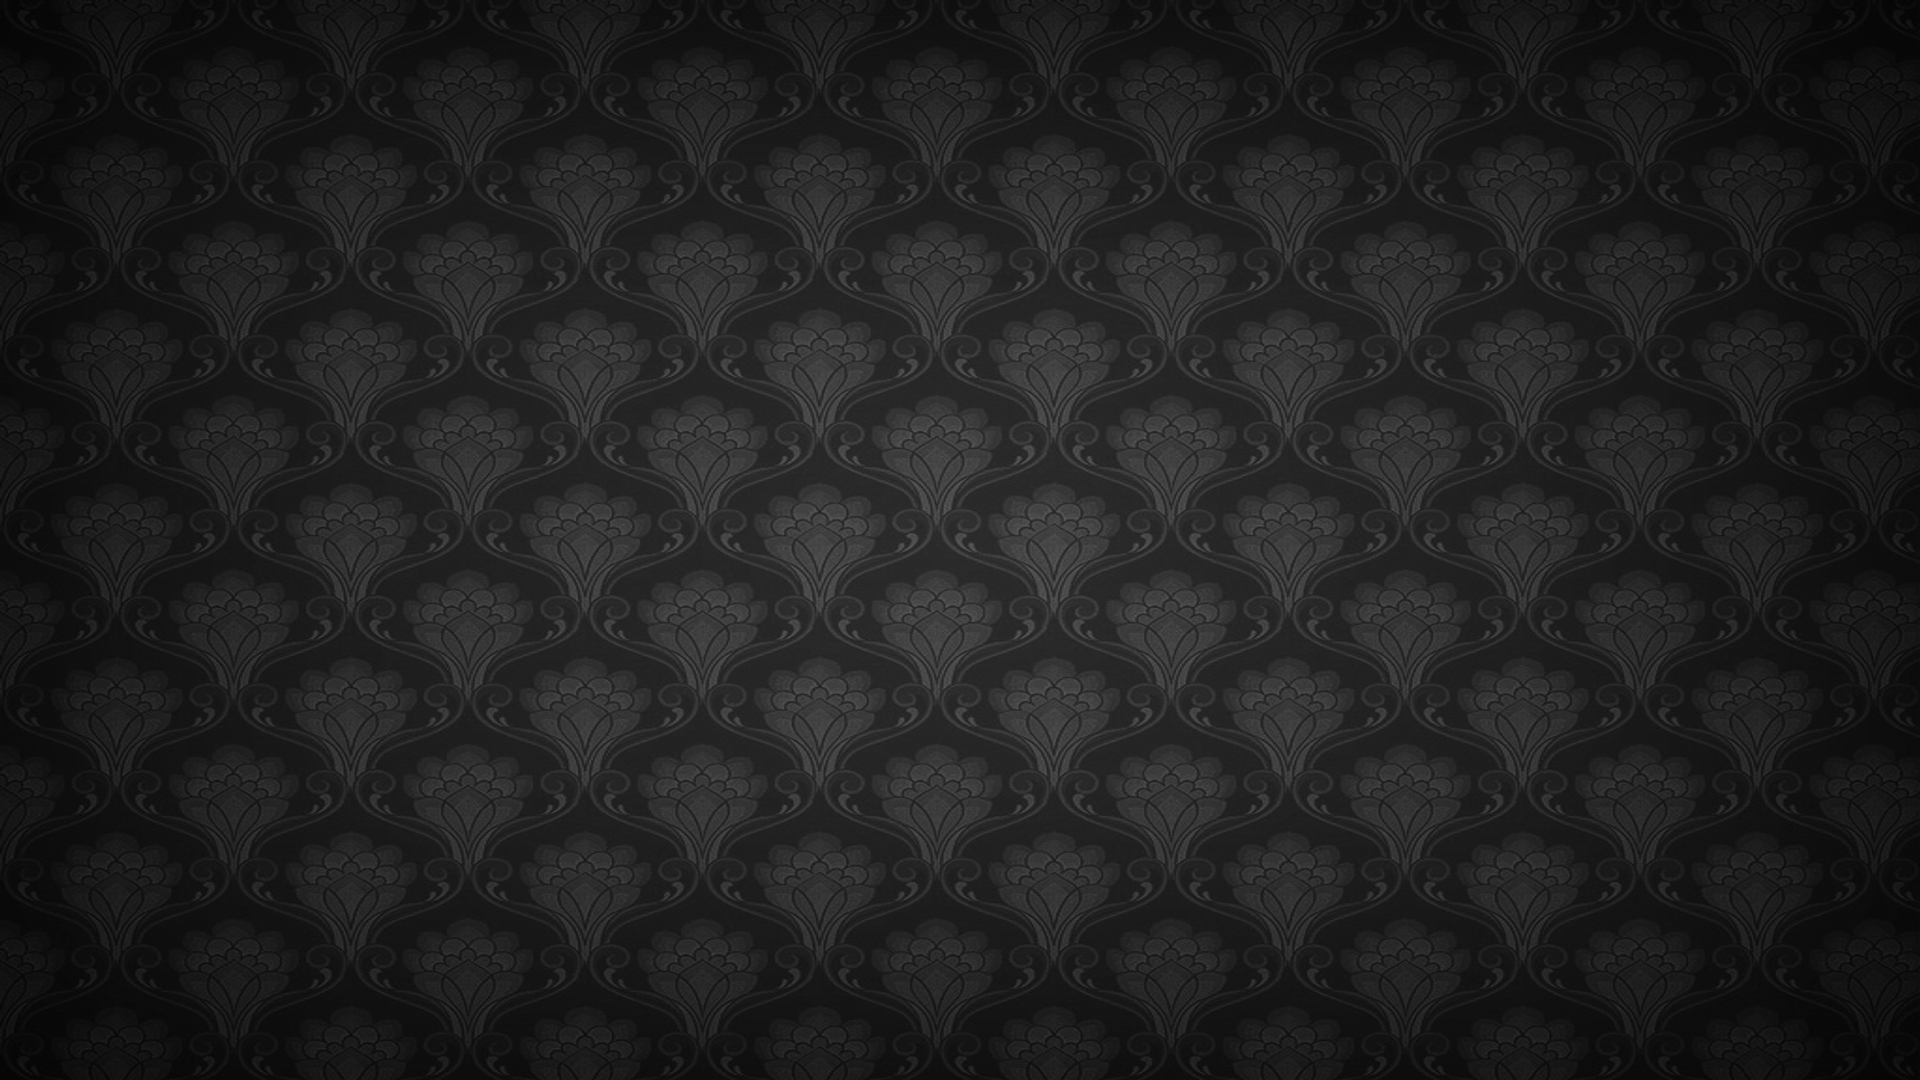 NXE Rainbow Tiles Submitted by Deadly Moves. Black Floral Wallpaper